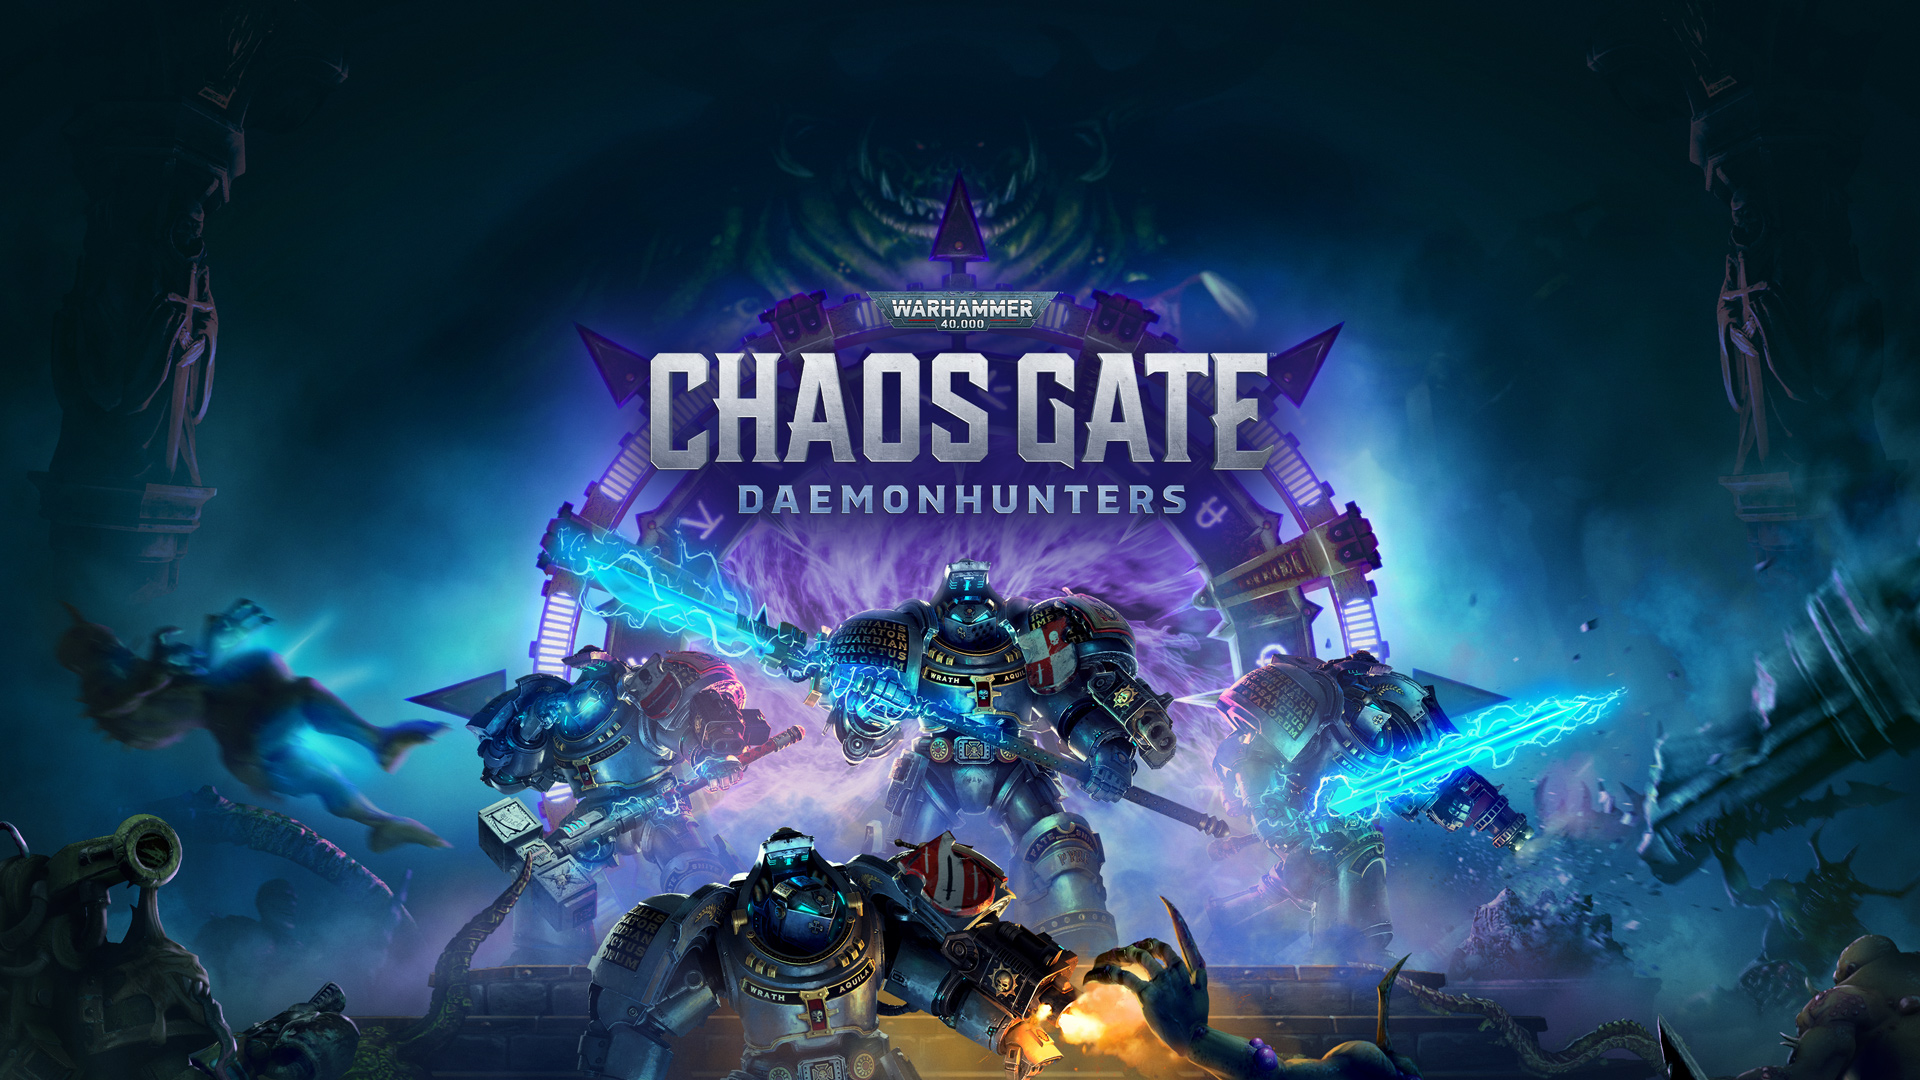 download the new for ios Warhammer 40,000: Chaos Gate - Daemonhunters